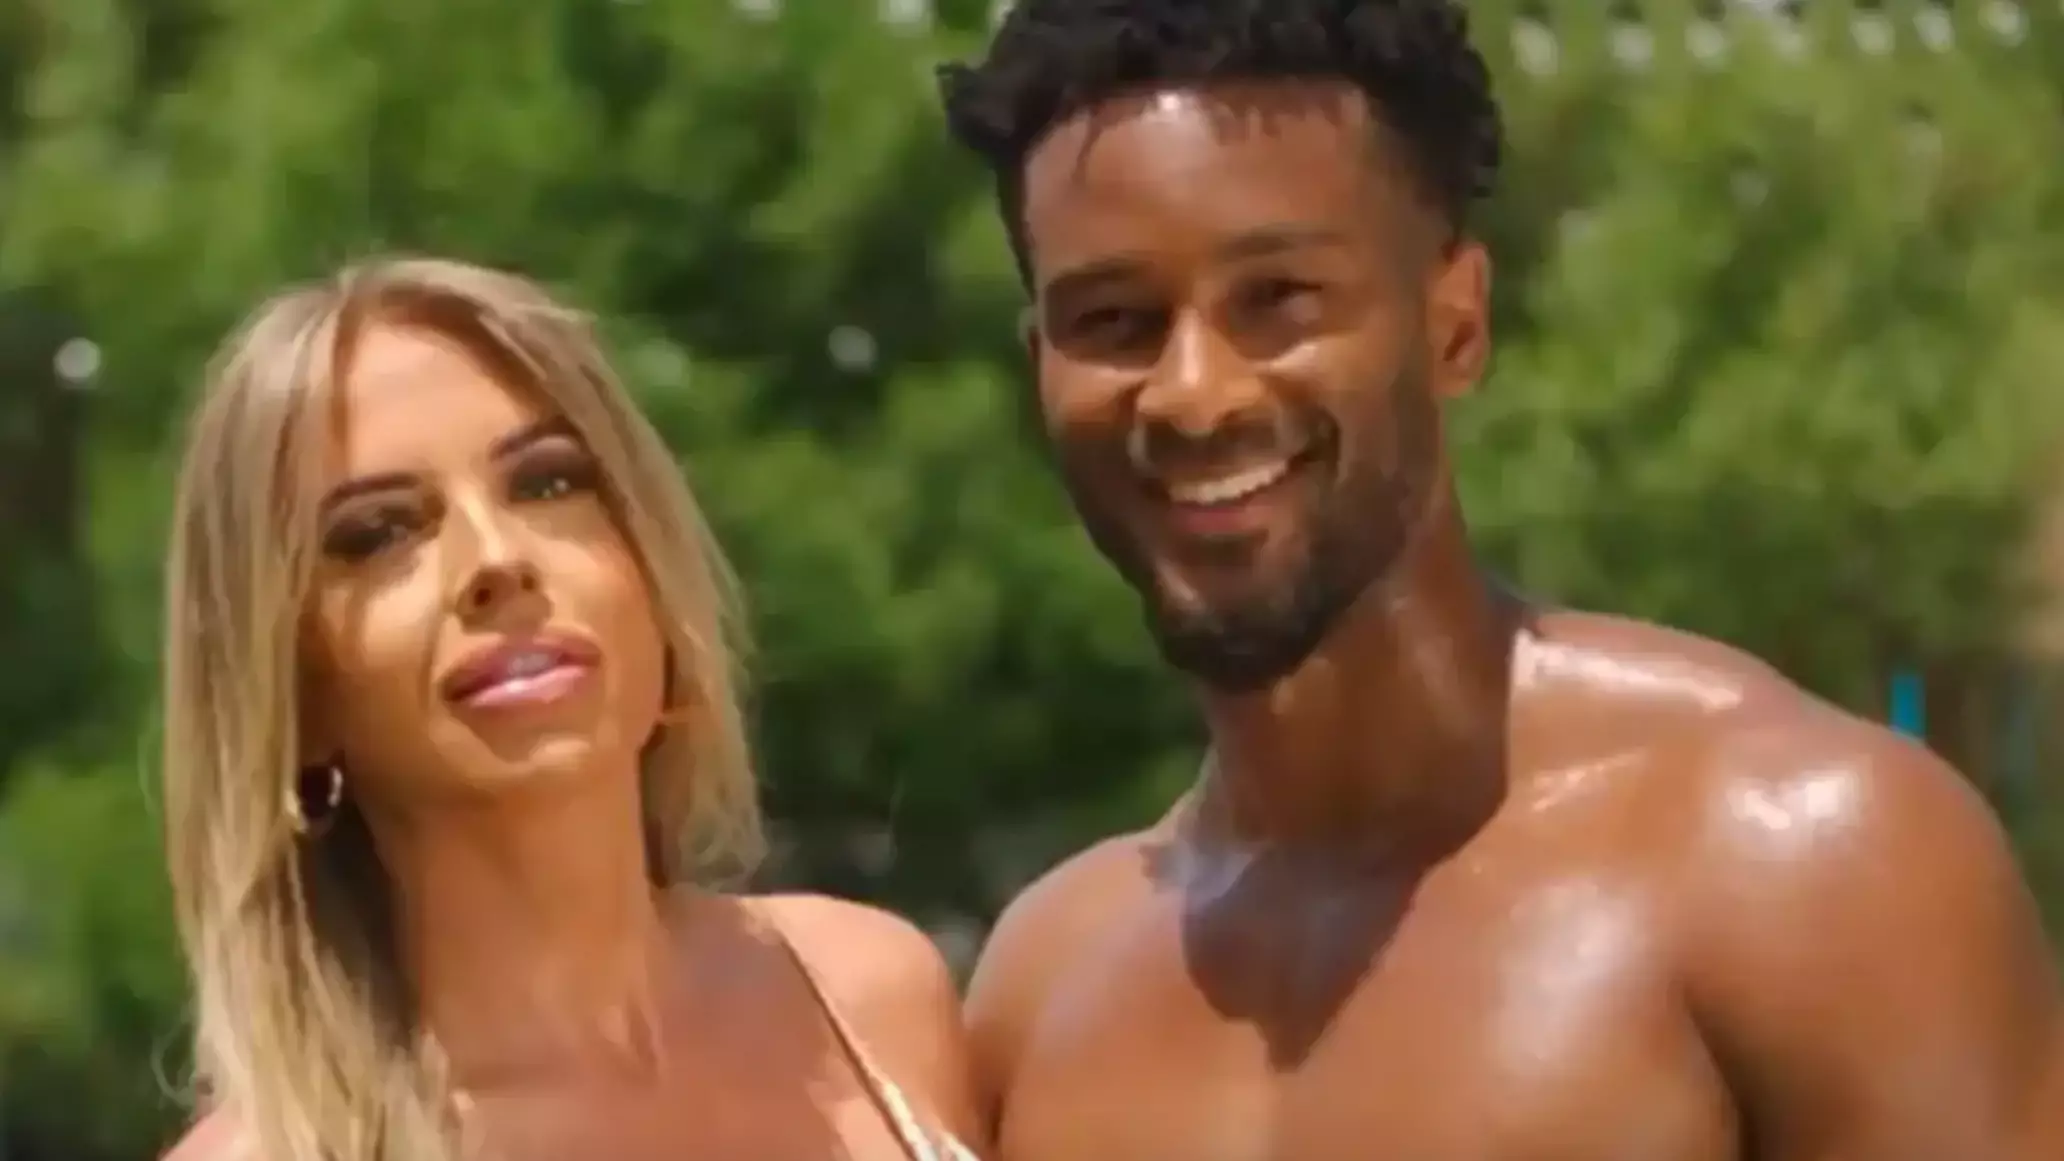 Love Island: Teddy Soares' Family Responds To Faye Winter's Apology And Ofcom Complaints